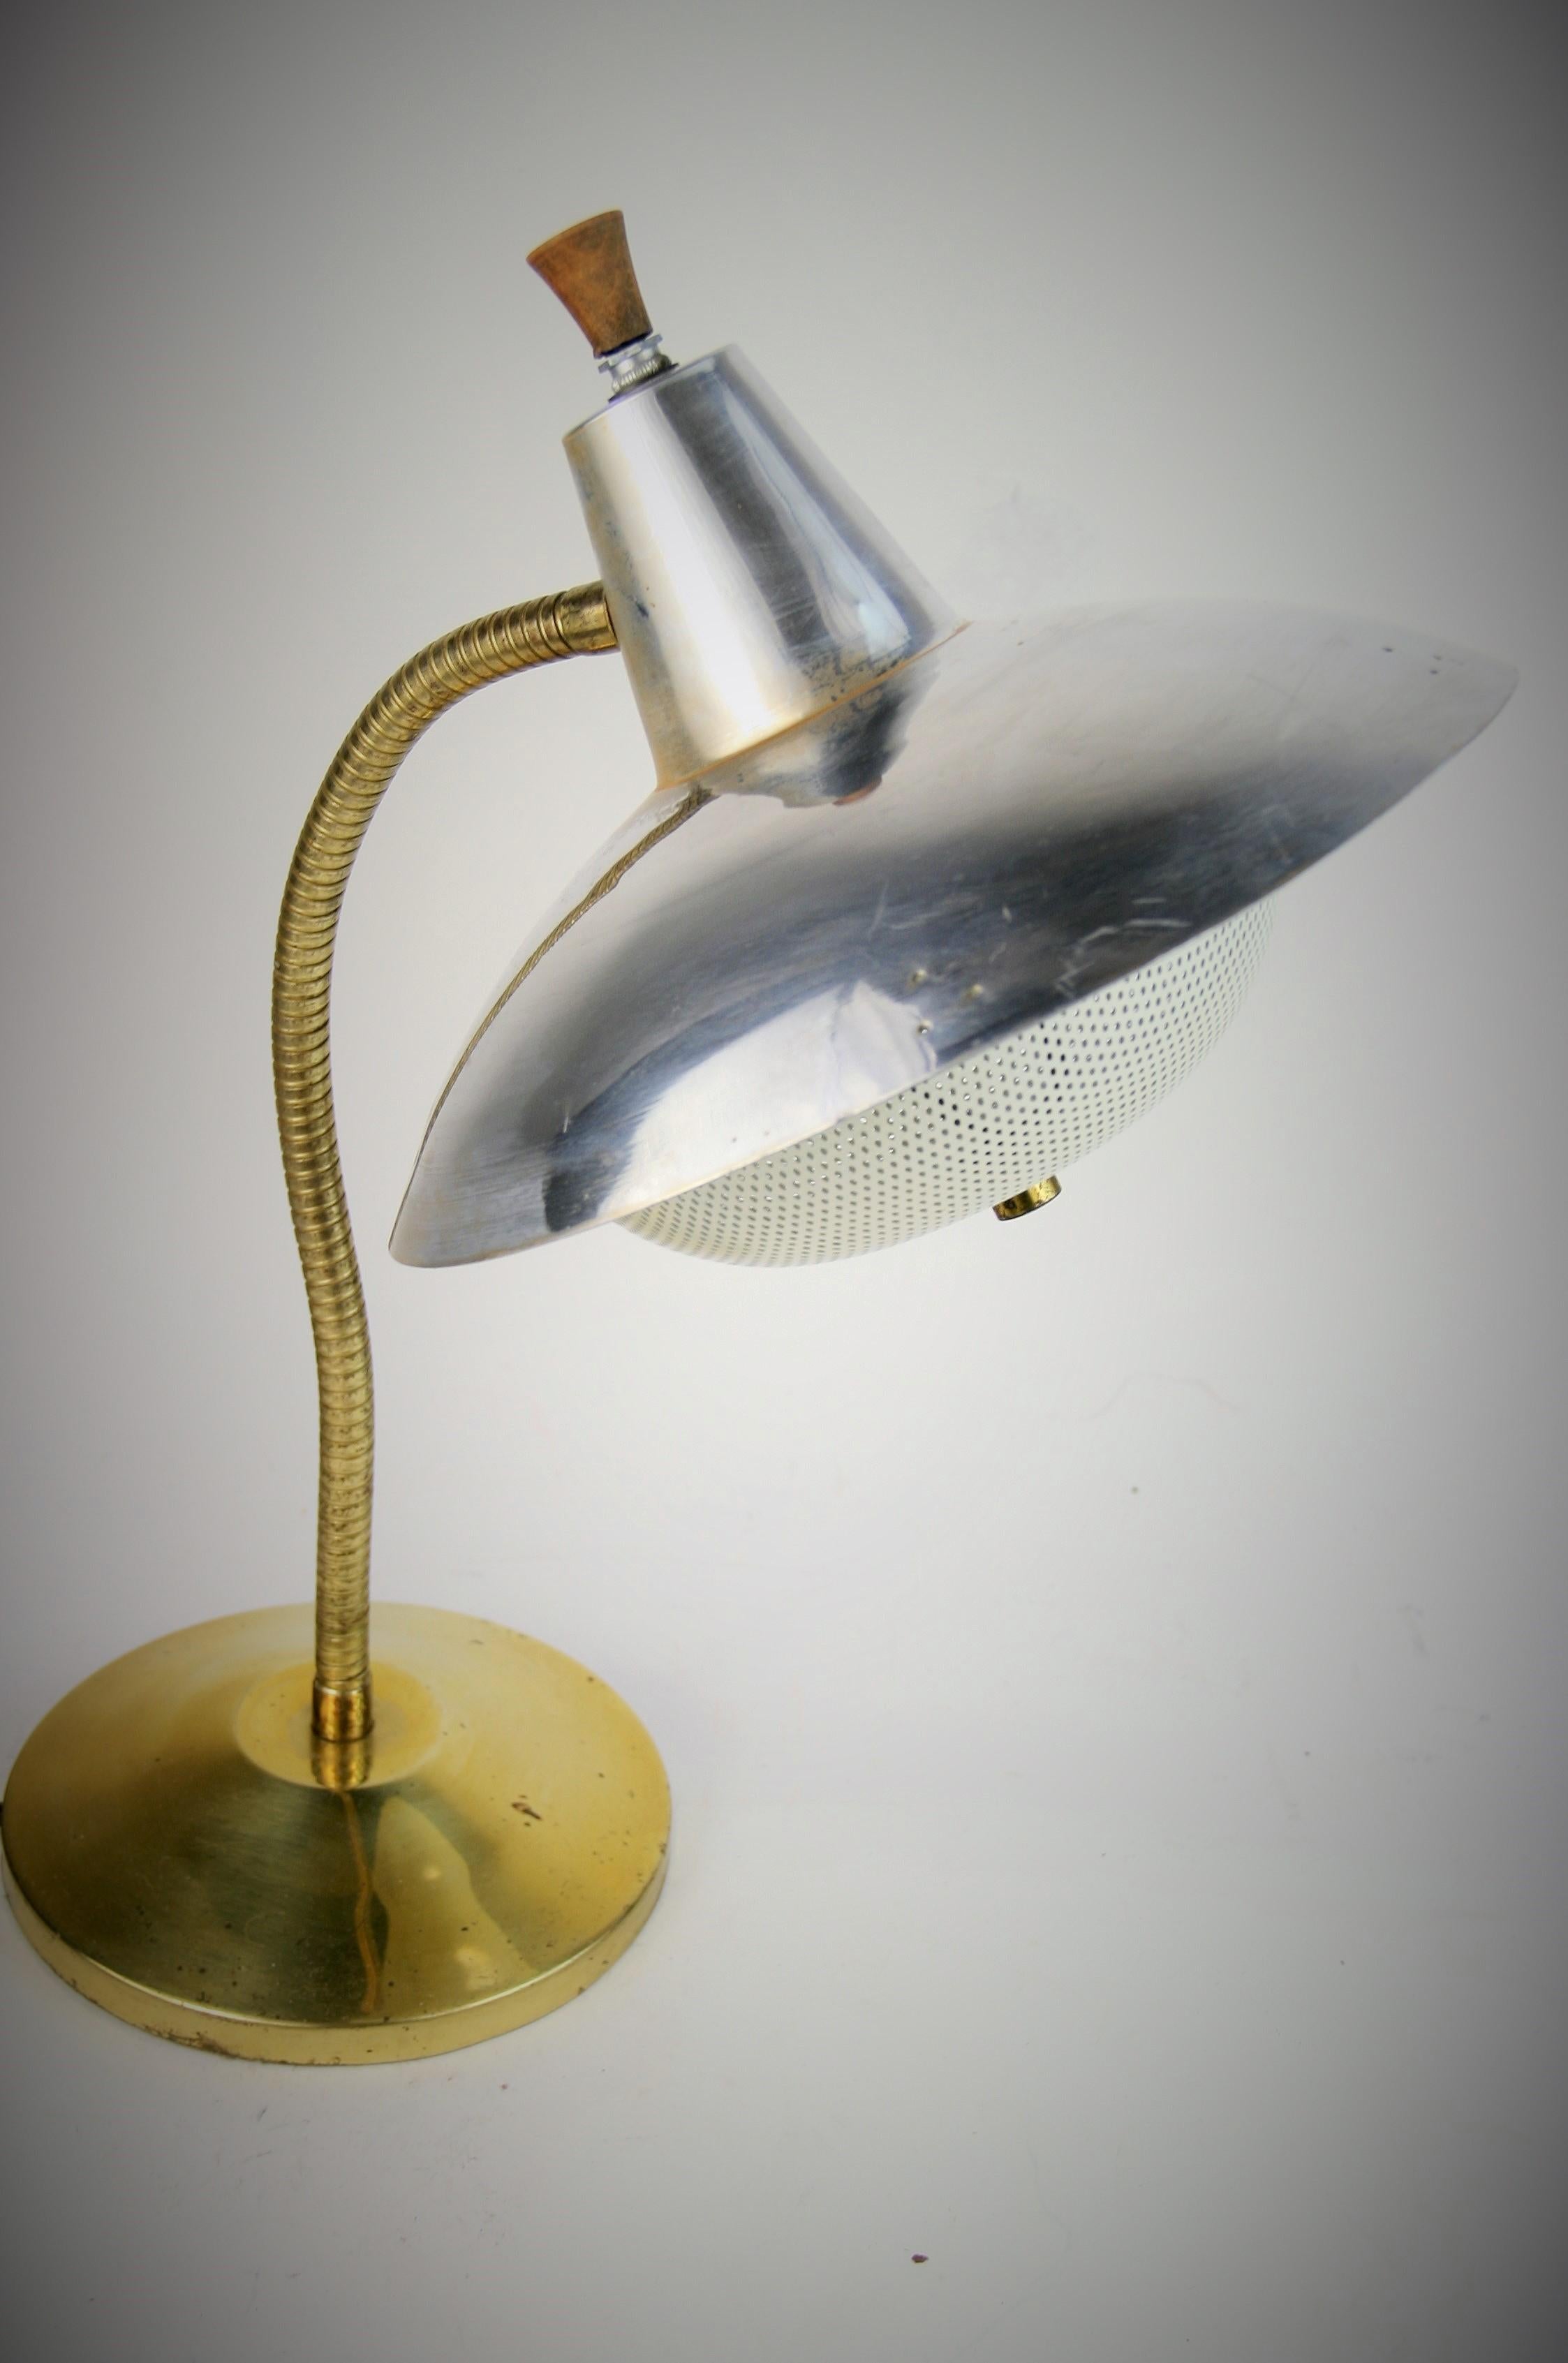 2-328 brass and aluminum adjustable table/desk lamp with perforated baffle
Original wiring in working order.